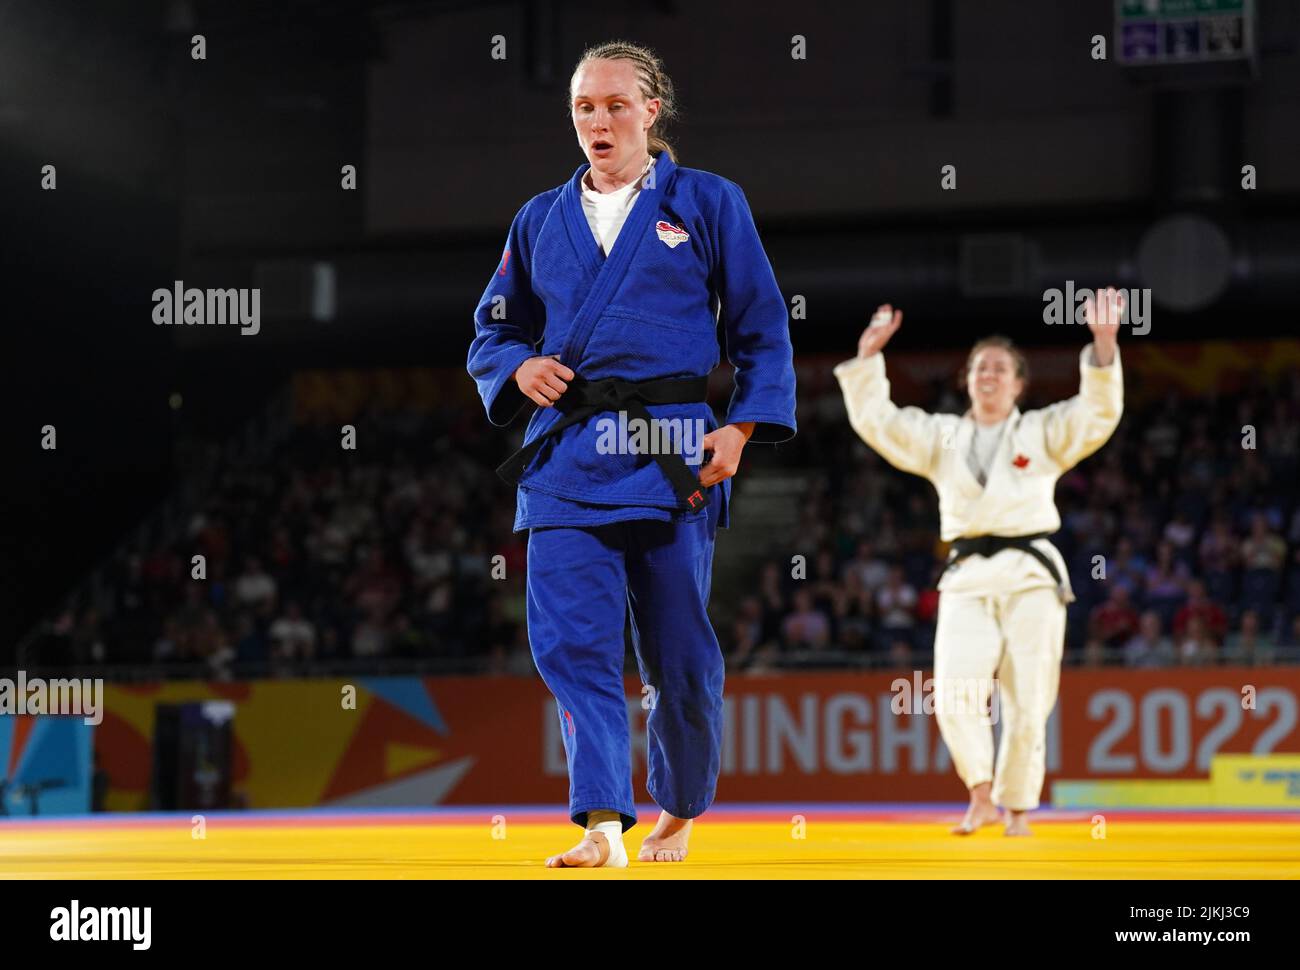 England's Gemma Howell (left) reacts after defeat by Canada's Catherine Beauchemin-Pinard in the Women's -63 kg Final at Coventry Arena on day five of the 2022 Commonwealth Games. Picture date: Tuesday August 2, 2022. Stock Photo